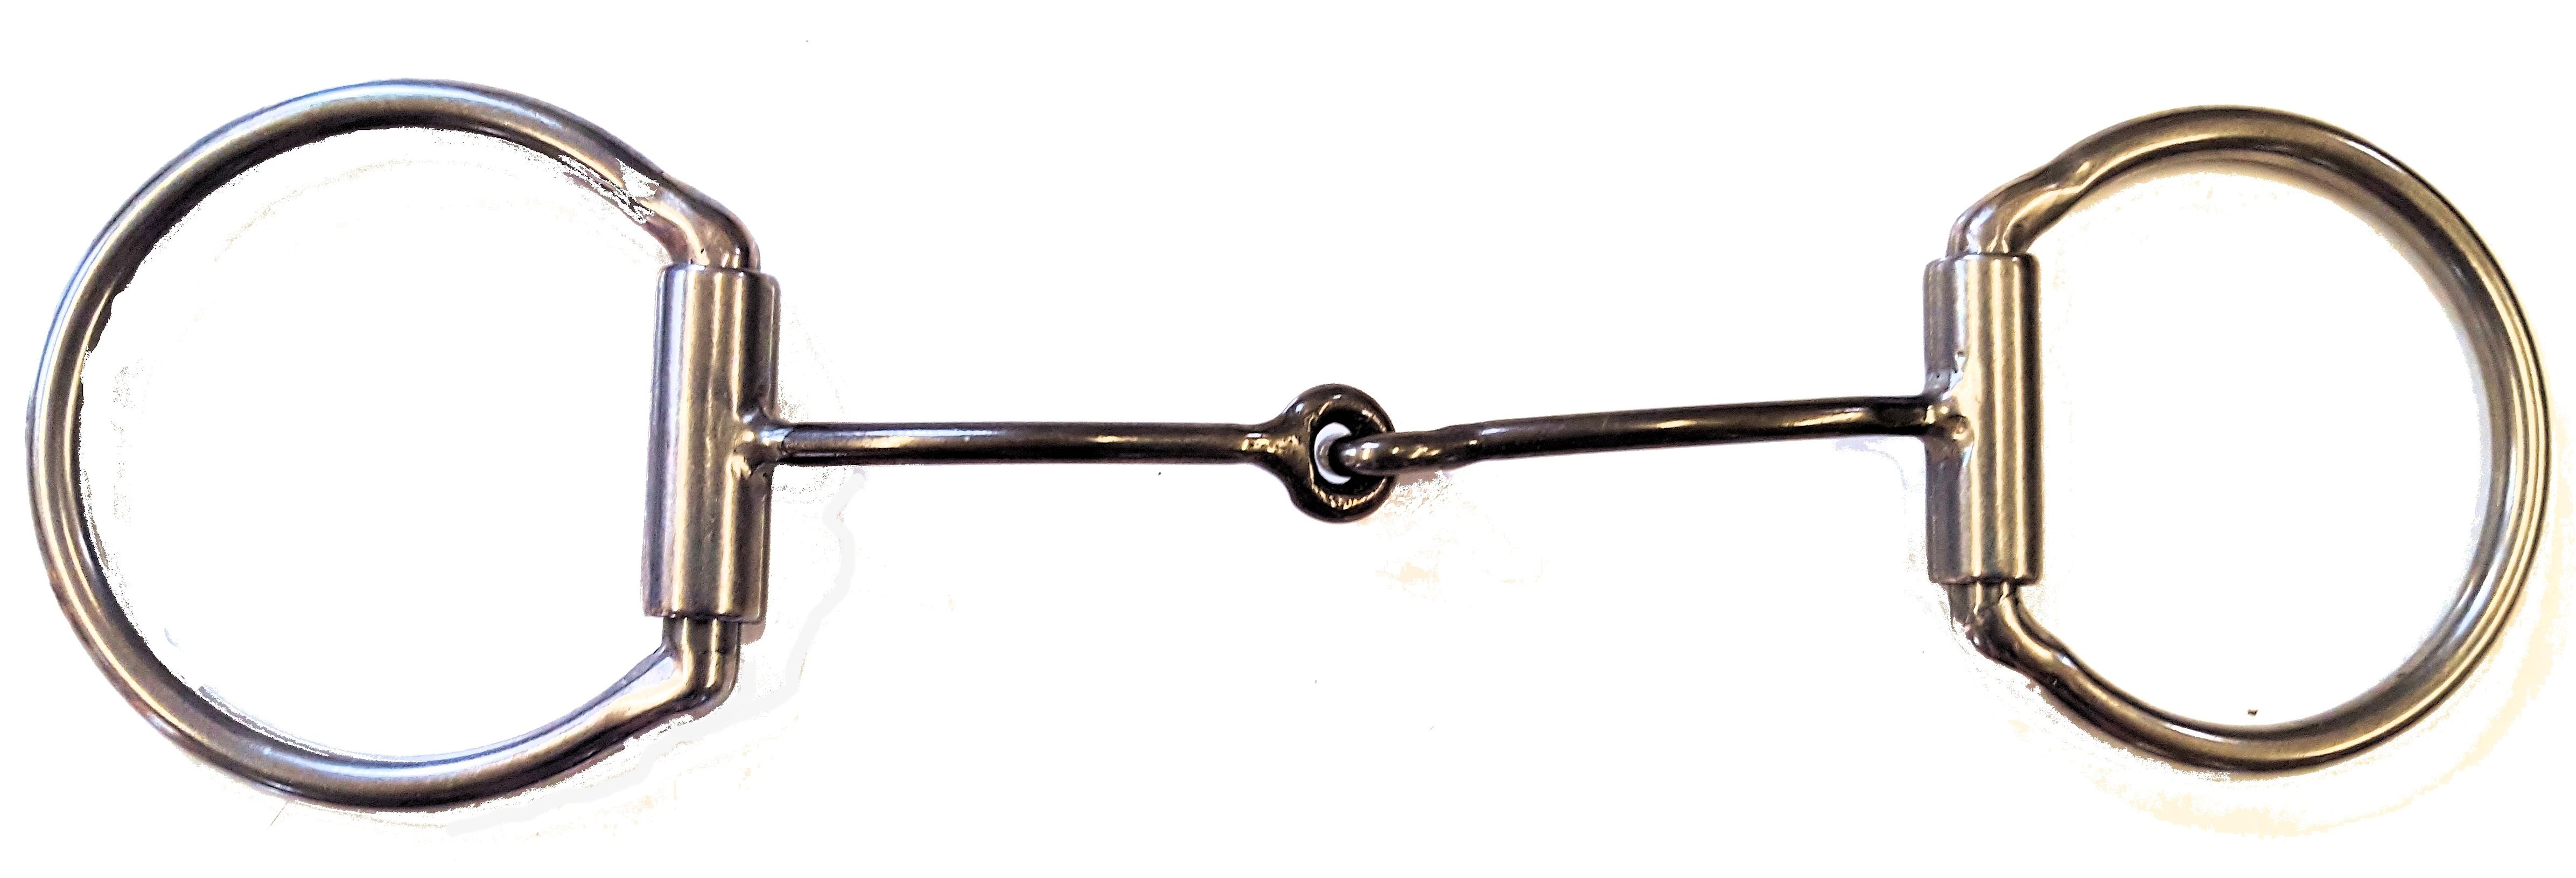 1/8" Smooth Snaffle